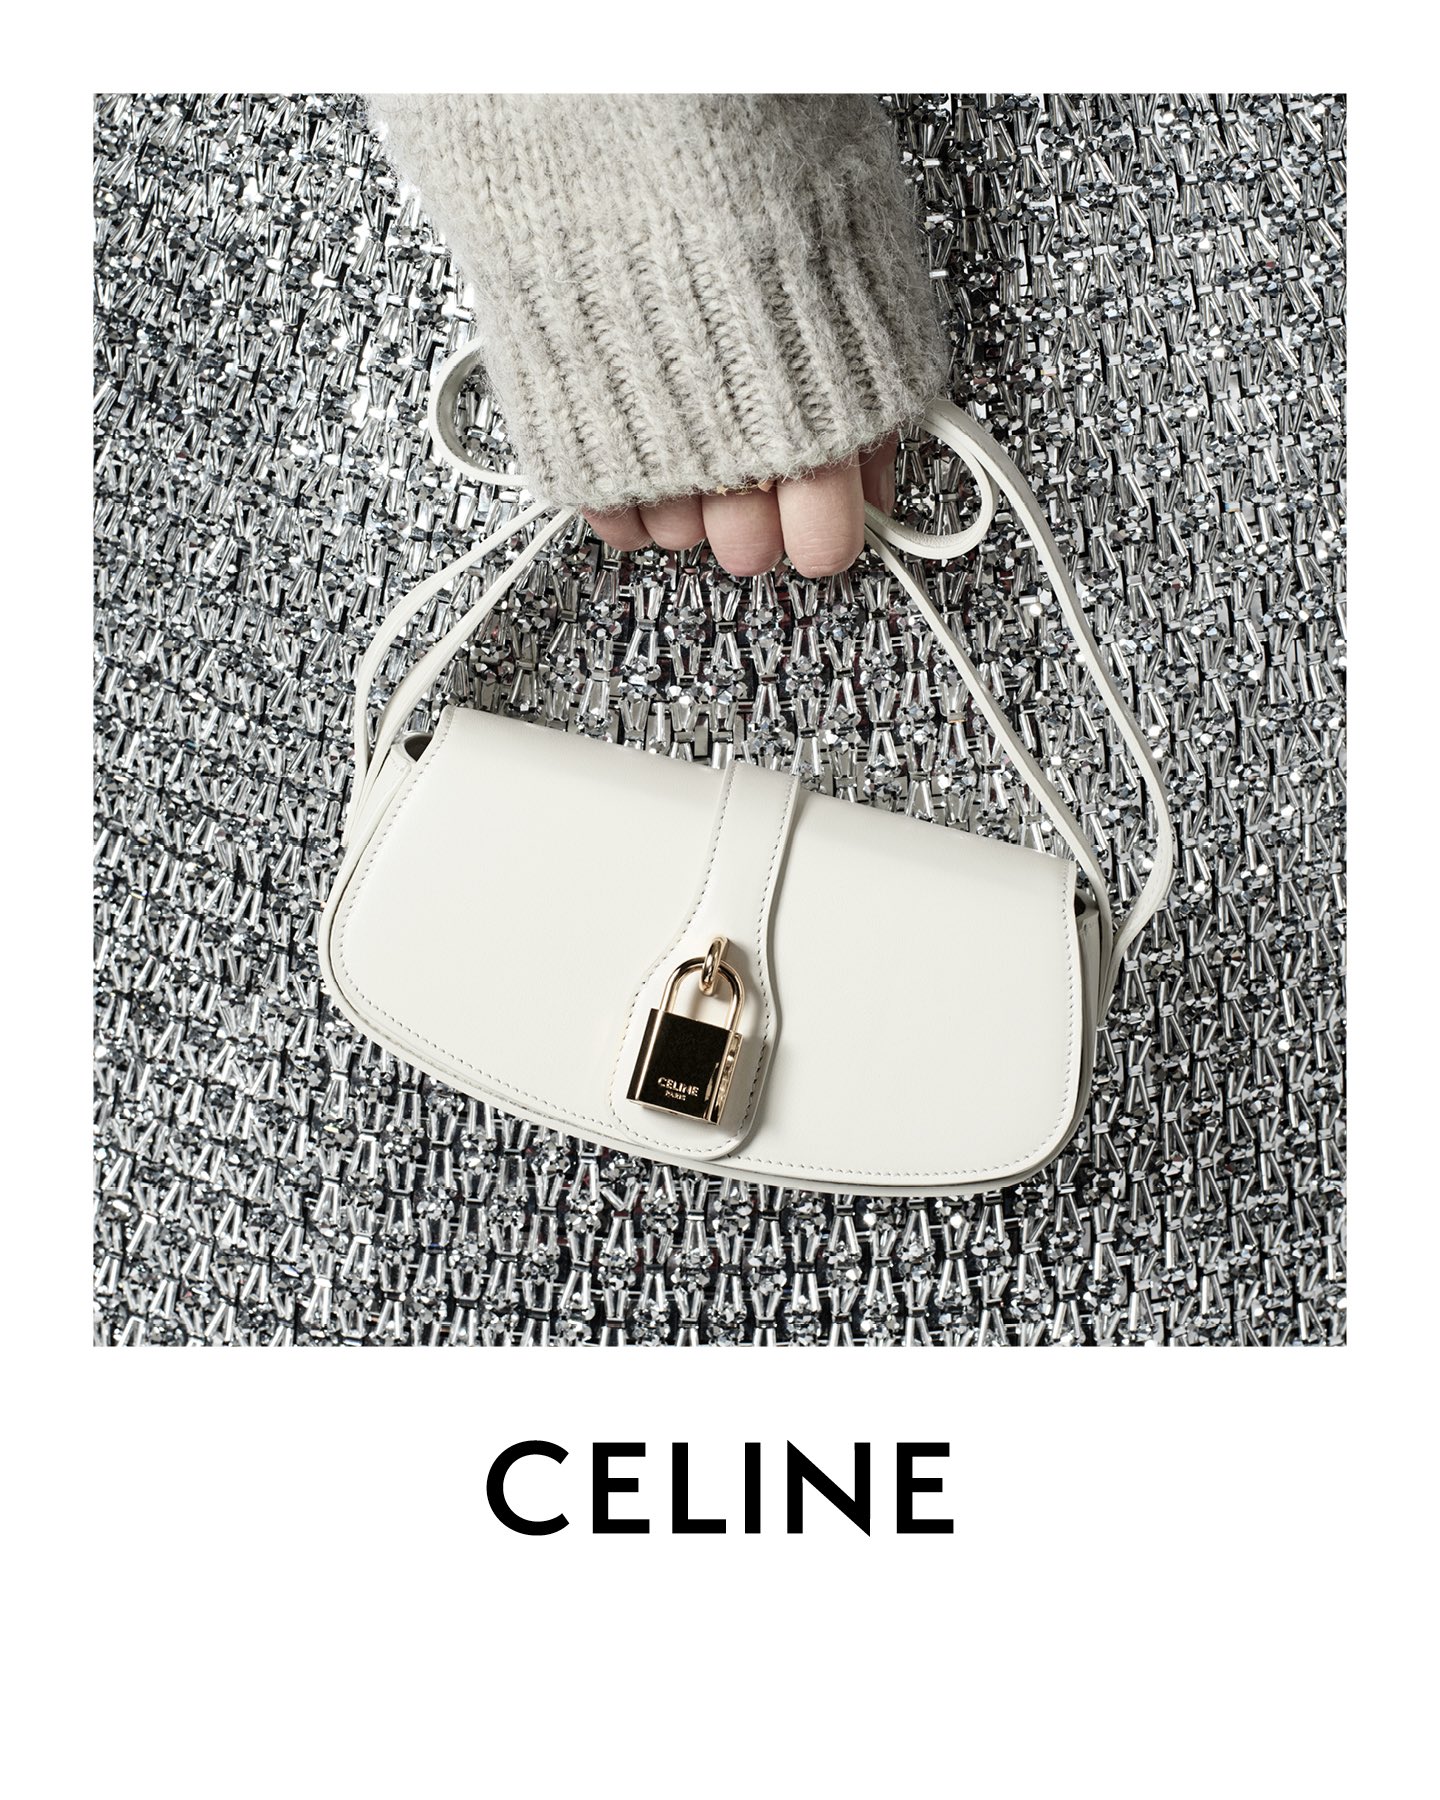 CELINE on X: CELINE WOMEN WINTER 21​ ​ TABOU STRAP CLUTCH​ INTRODUCING THE  NEW CELINE BAG​ ​ CELINE EMBROIDERED TEEN CRINO​ ​ 920 WORK HOURS​ 28  EMBROIDERERS​ 260 000 TUBE BEADS​ 46